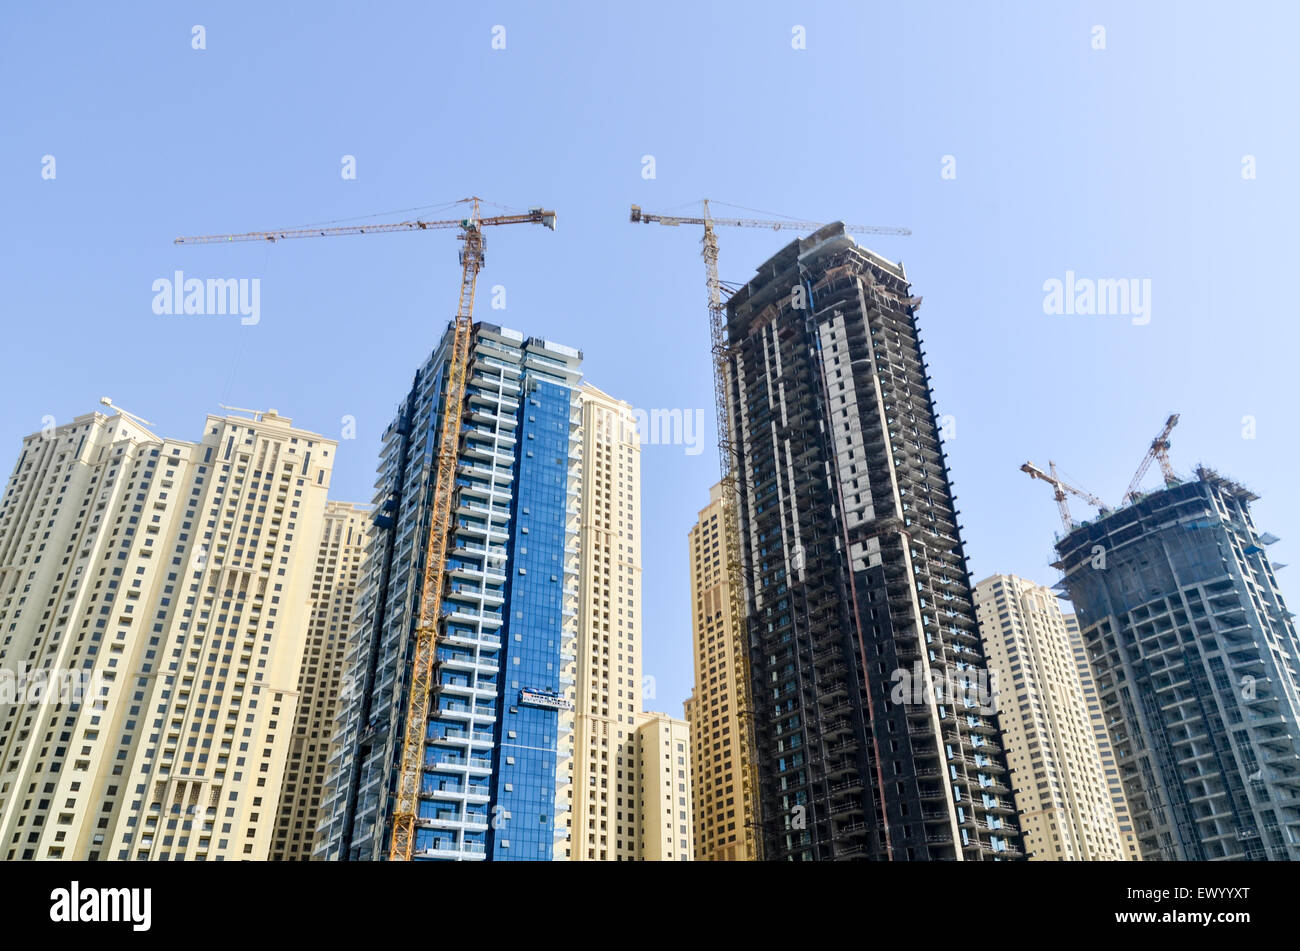 Cranes and construction of modern high rise buildings, towers and hotels of the Dubai Marina, United Arab Emirates Stock Photo